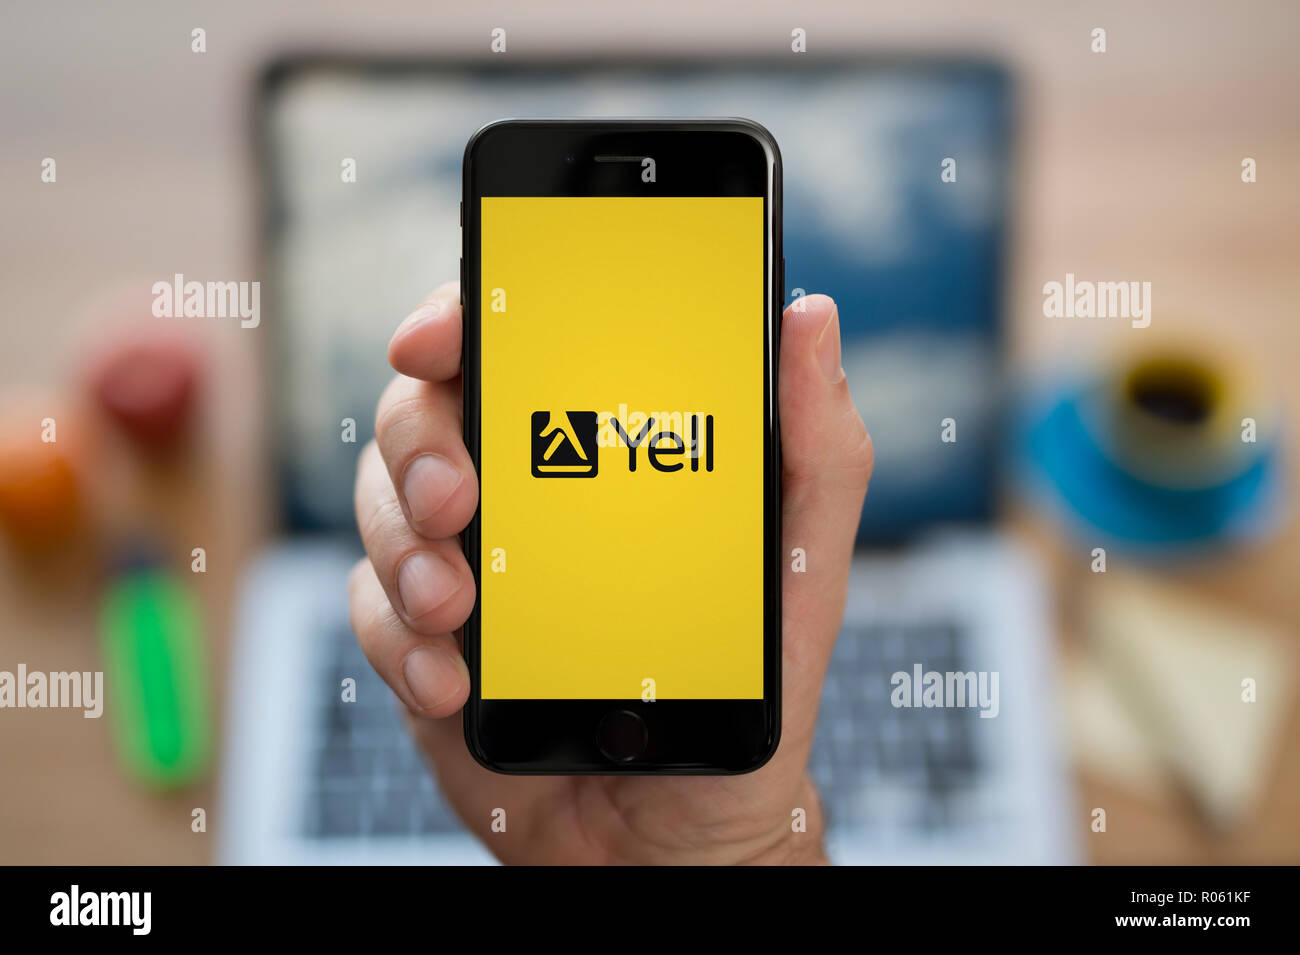 A man looks at his iPhone which displays the Yell logo, while sat at his computer desk (Editorial use only). Stock Photo